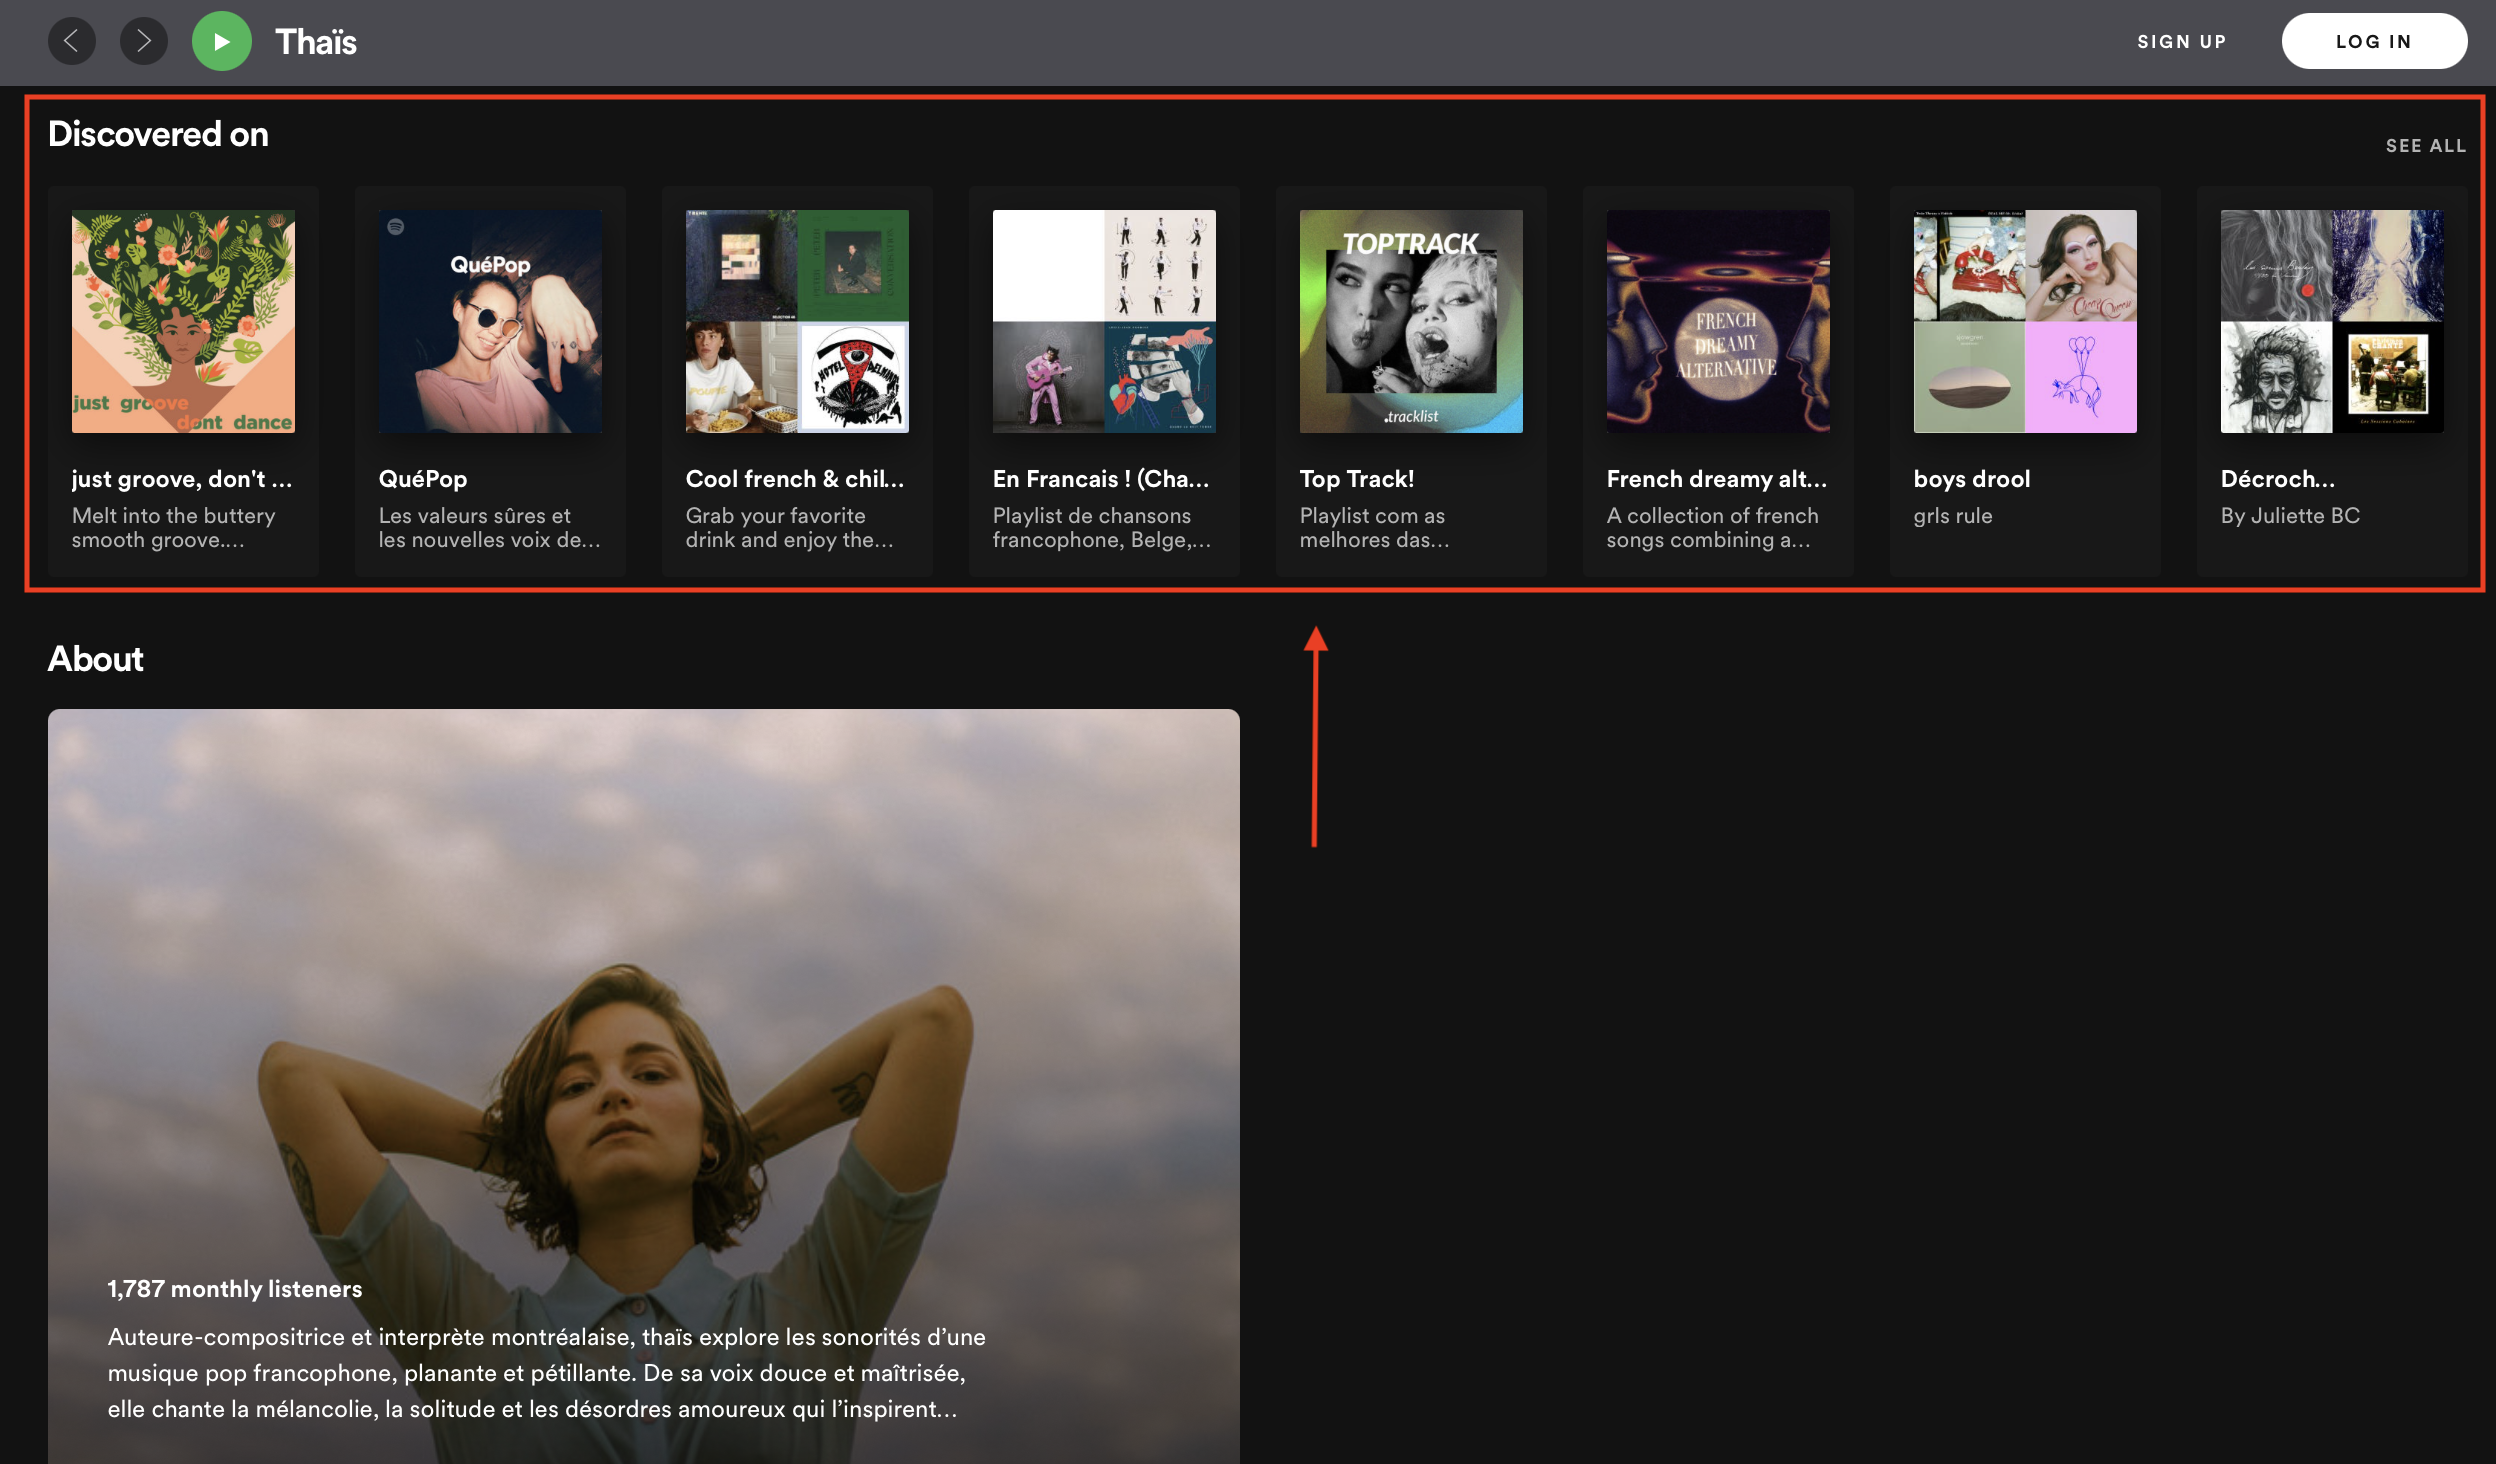 The artist can see which official playlists or third party playlists similar artists appear on Spotify.